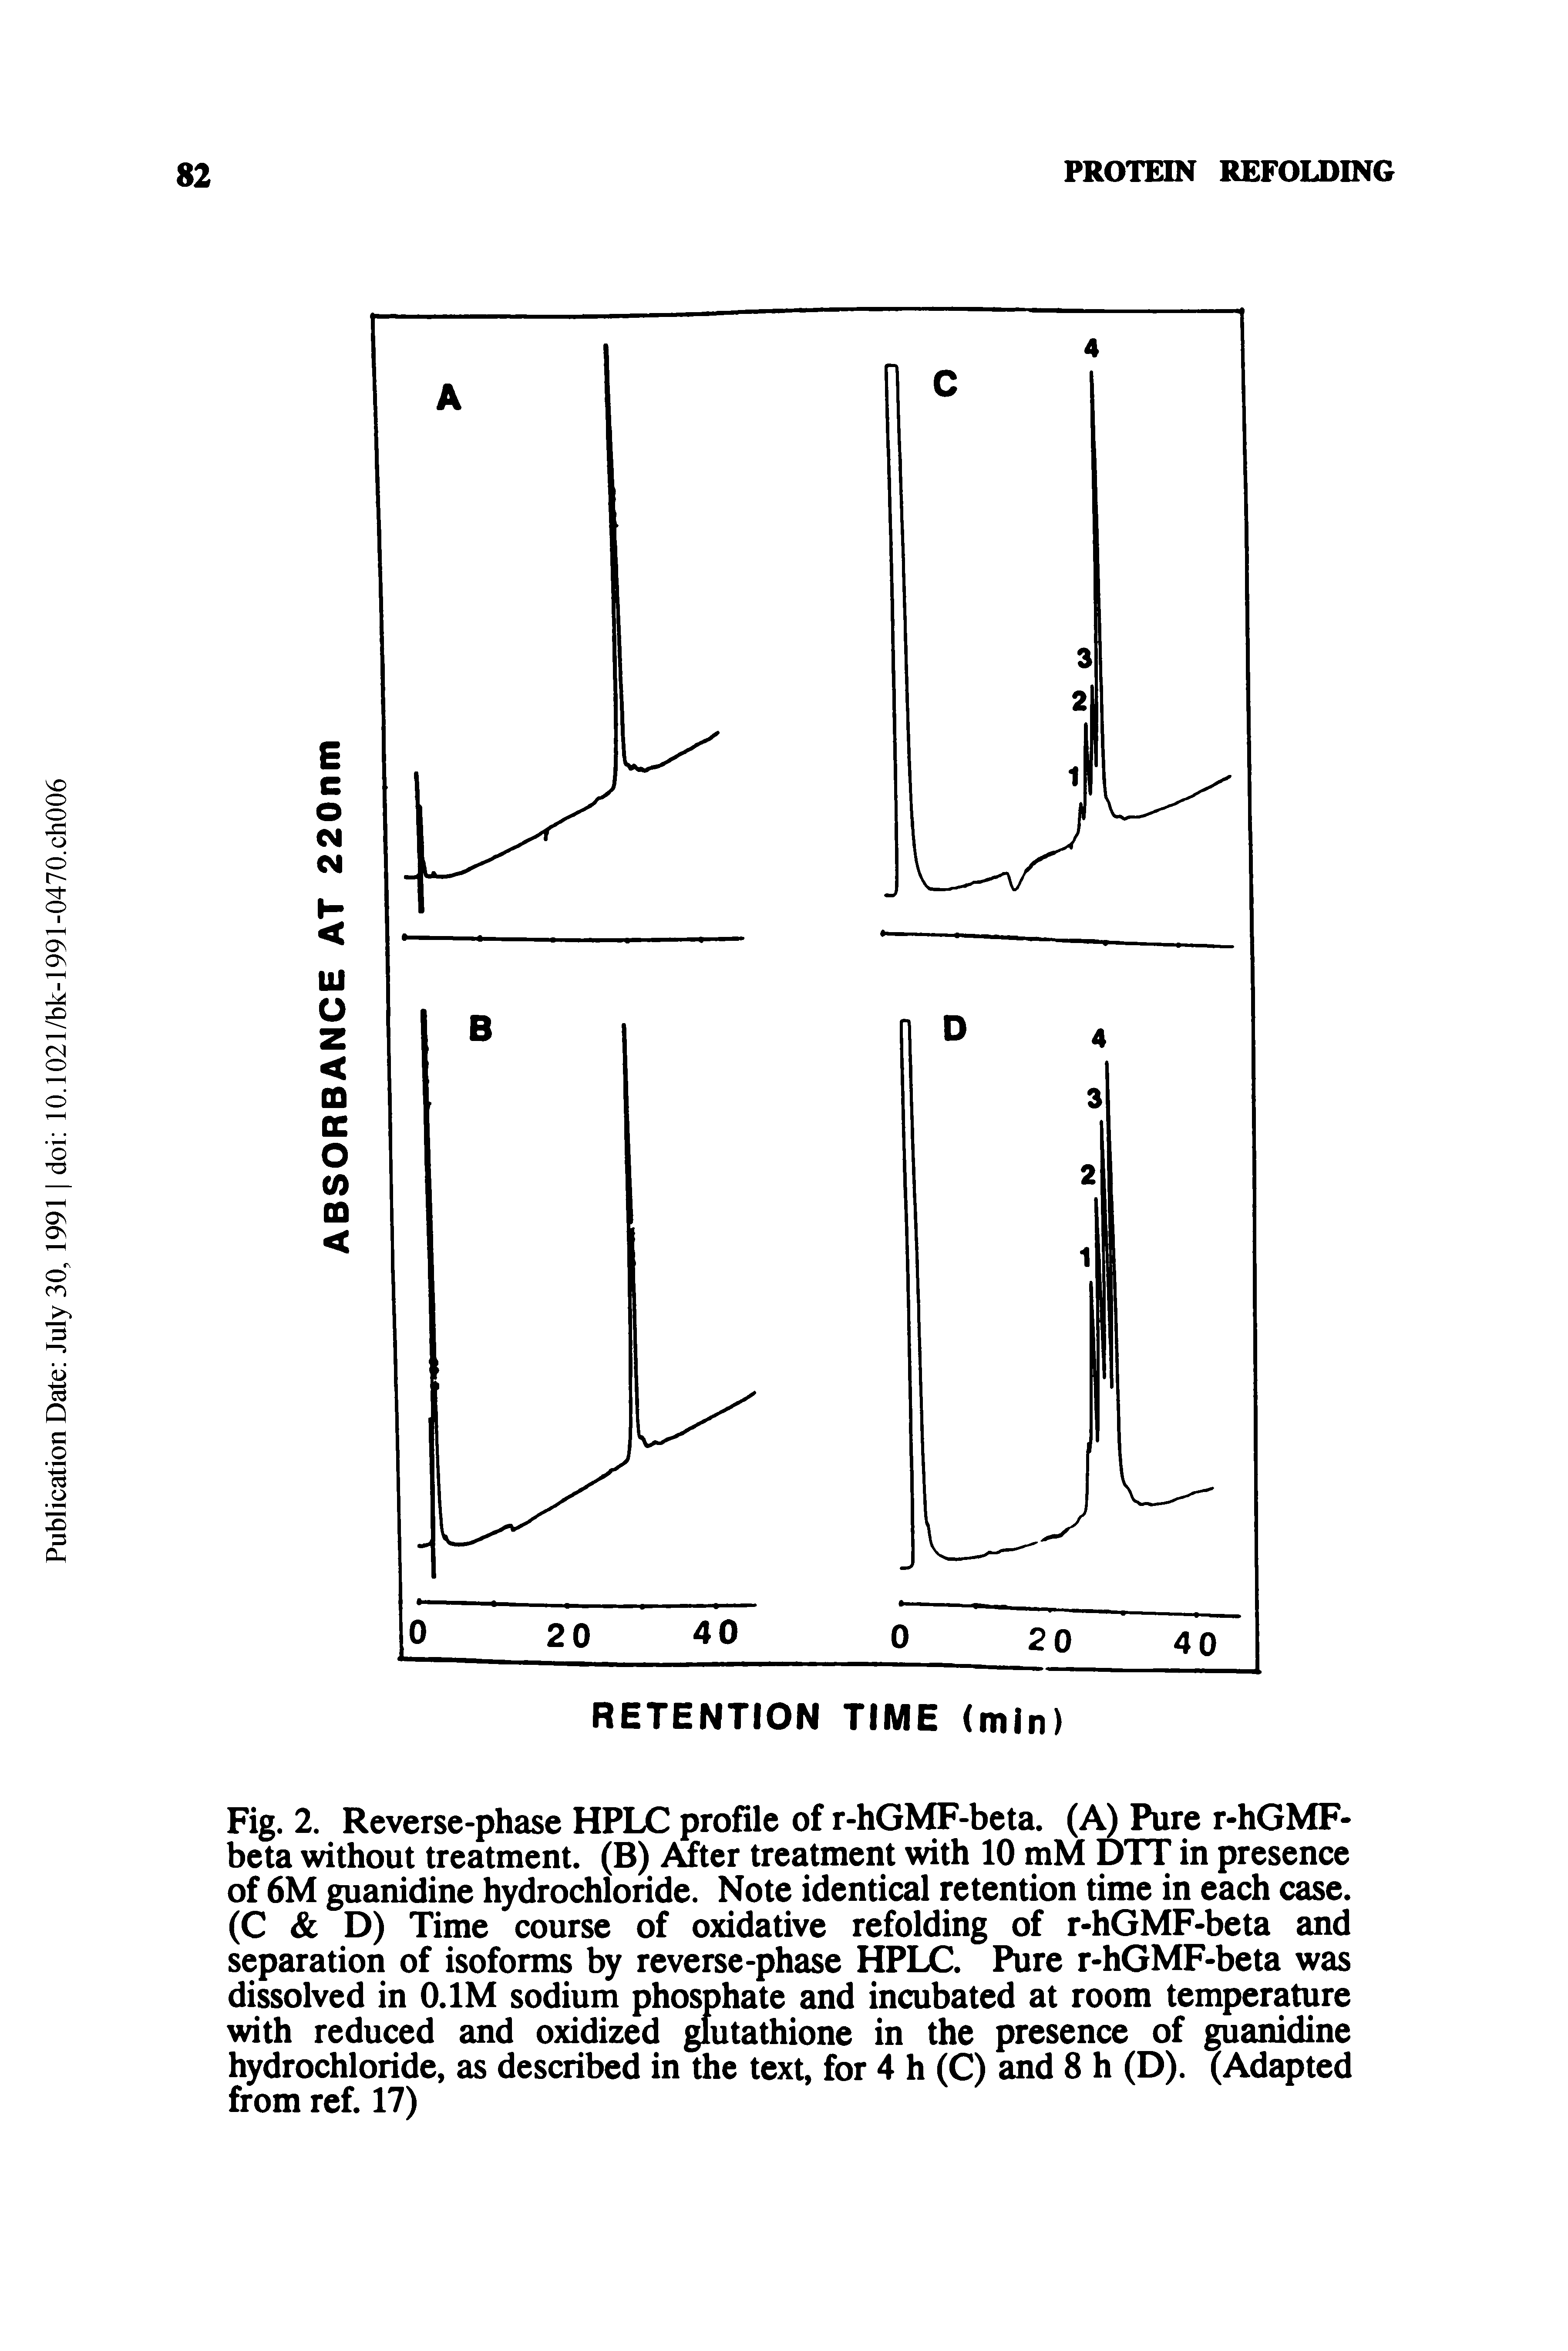 Fig. 2. Reverse-phase HPLC profile of r-hGMF-beta. (A) Pure r-hGMF-beta without treatment. (B) After treatment with 10 mM DTT in presence of 6M guanidine hydrochloride. Note identical retention time in each case. (C D) Time course of oxidative refolding of r-hGMF-beta and separation of isoforms by reverse-phase HPLC. Pure r-hGMF-beta was dissolved in O.IM sodium phosphate and incubated at room temperature with reduced and oxidized glutathione in the presence of guanidine hydrochloride, as described in the text, for 4 h (C) and 8 h (D). (Adapted from ref. 17)...